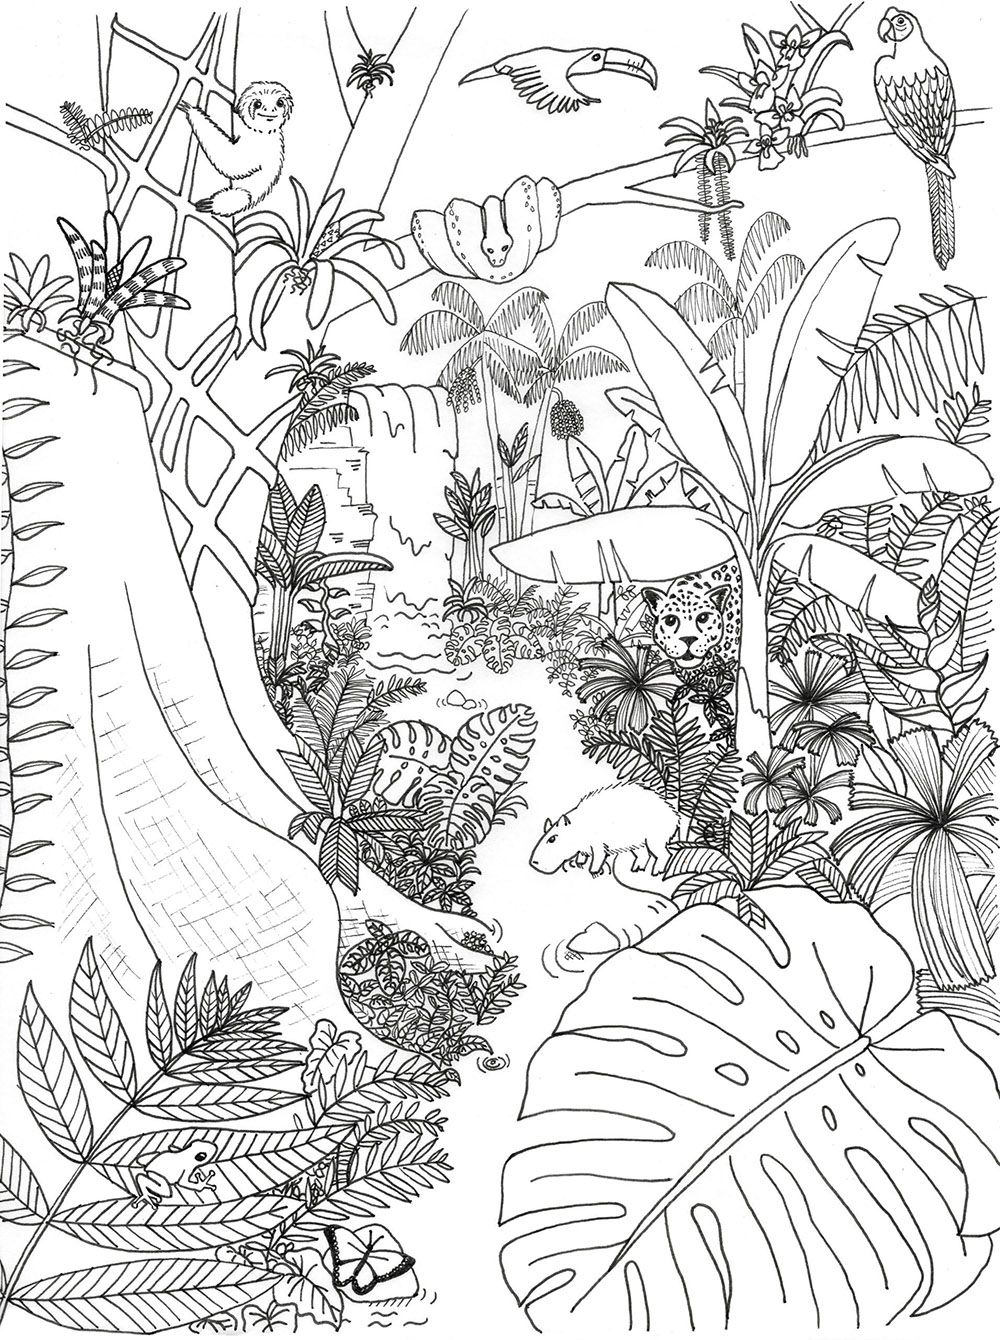 rainforest animals coloring page